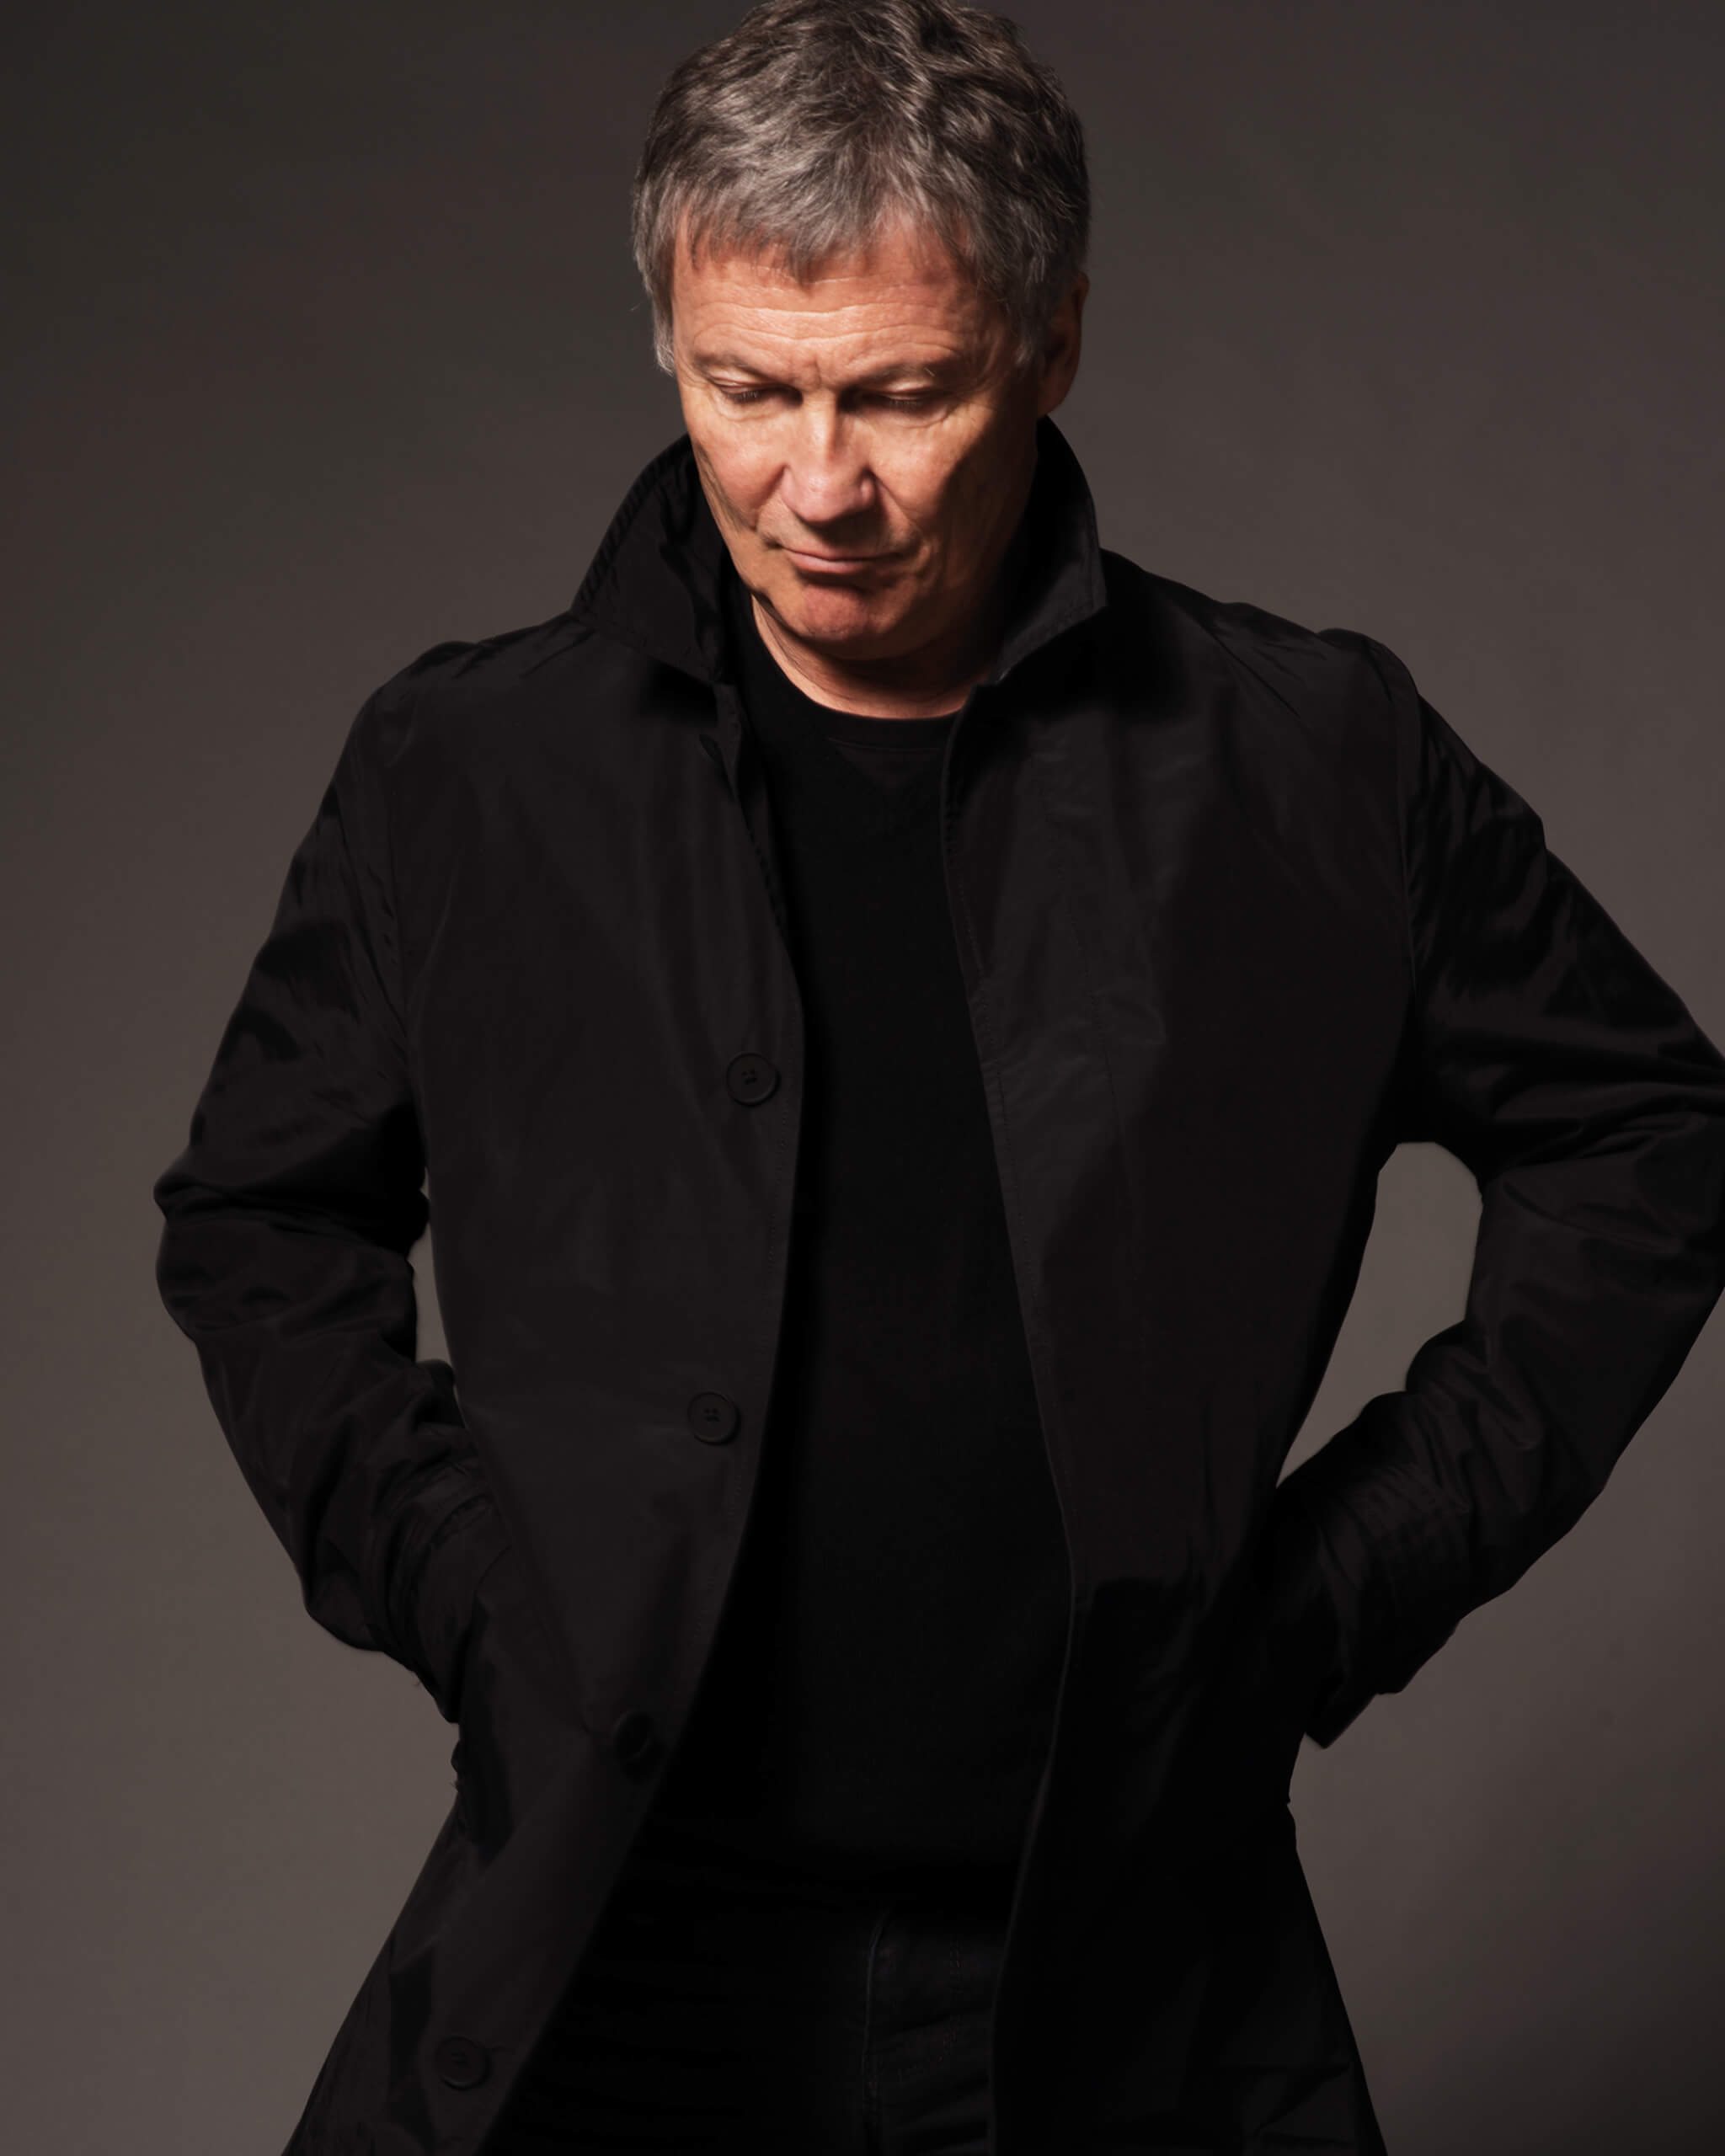 Michael Rother